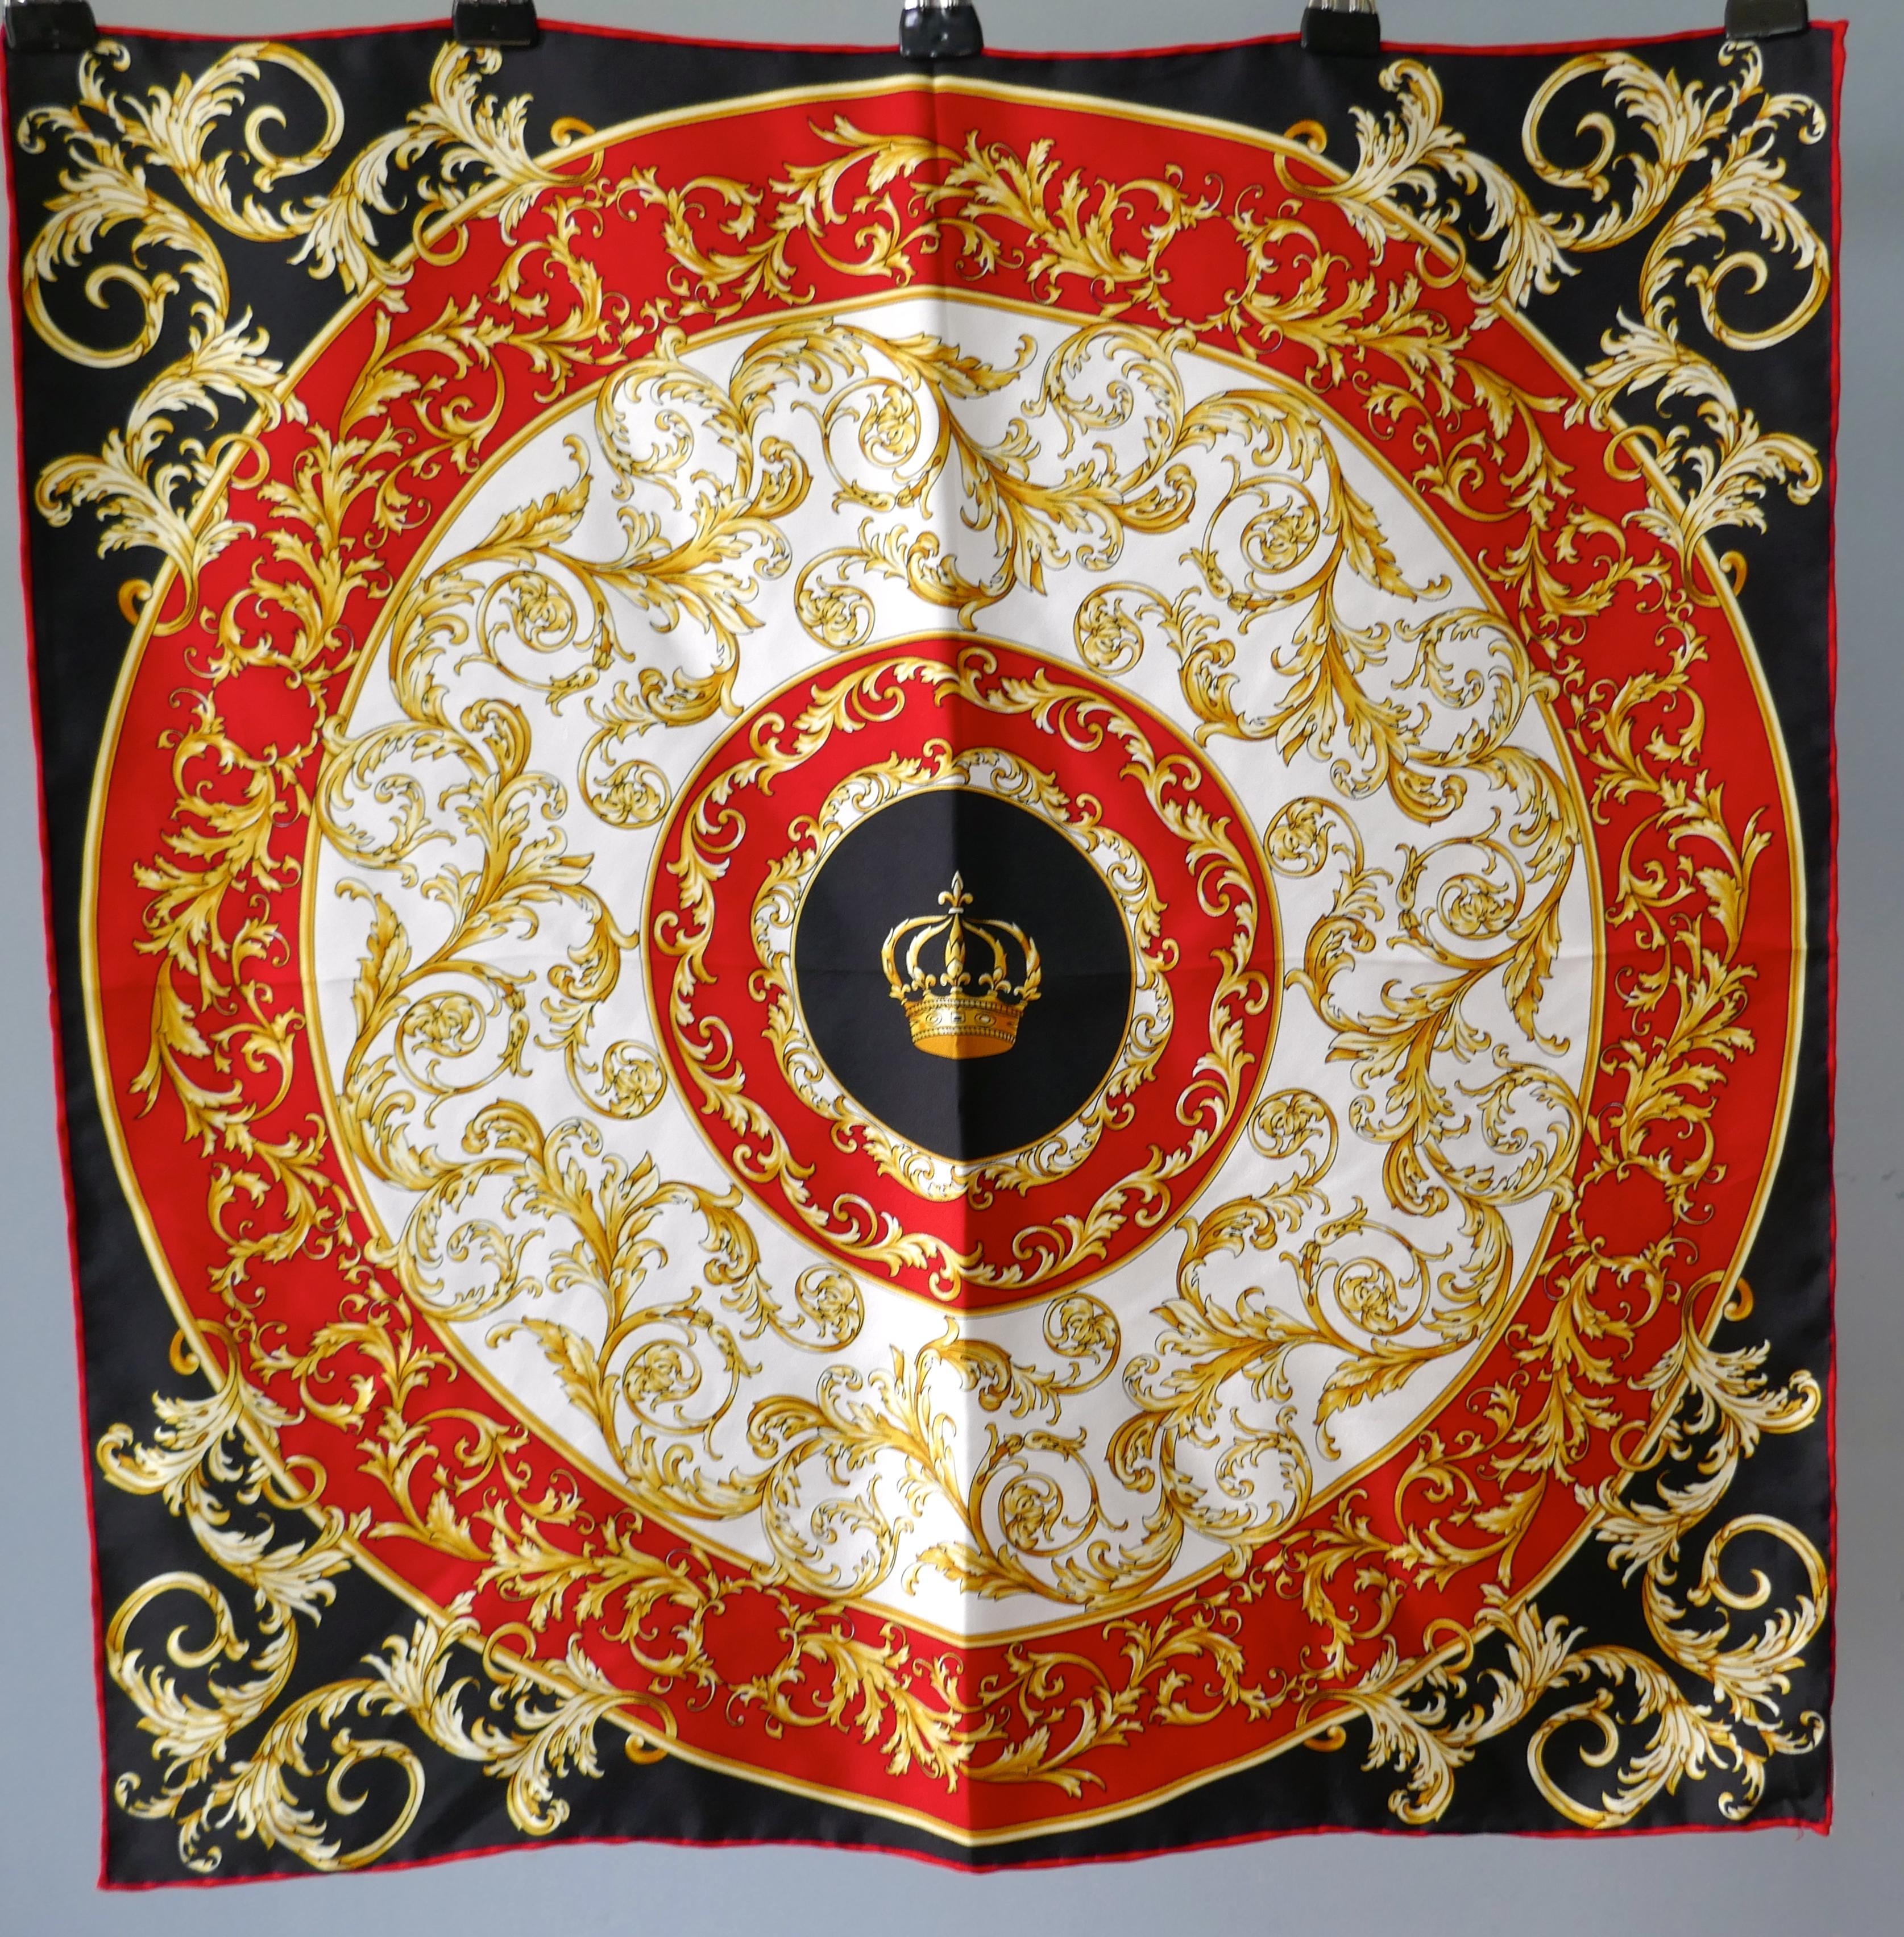 Helen Leigh Silk Neck Scarf Classical Armorial Design from the Italian Collection

Lovely scarf with Crown set in a central cartouche, this denotes a Titled connection 
In Gold, Black and Red Pallet, Silk Scarf measures 21”x 21”
It is as crisp as